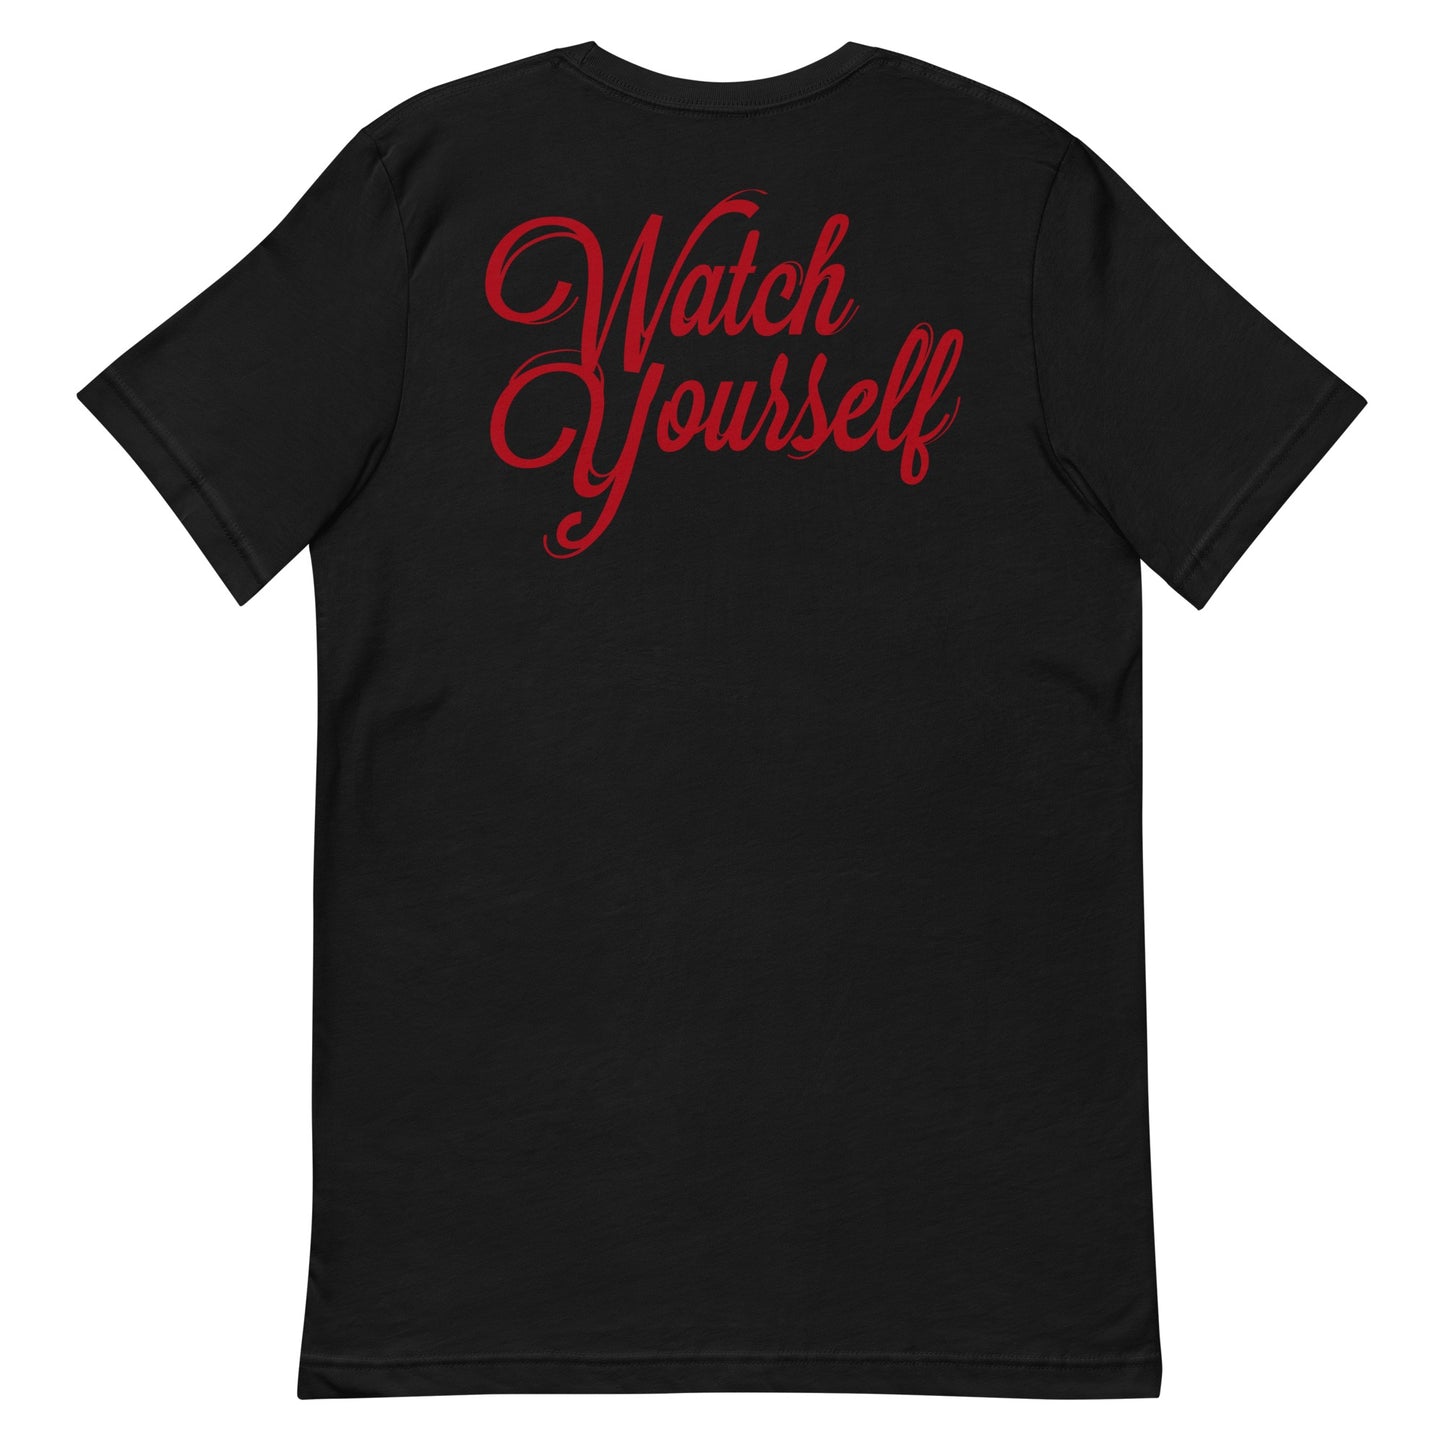 Us Watch Yourself T-Shirt